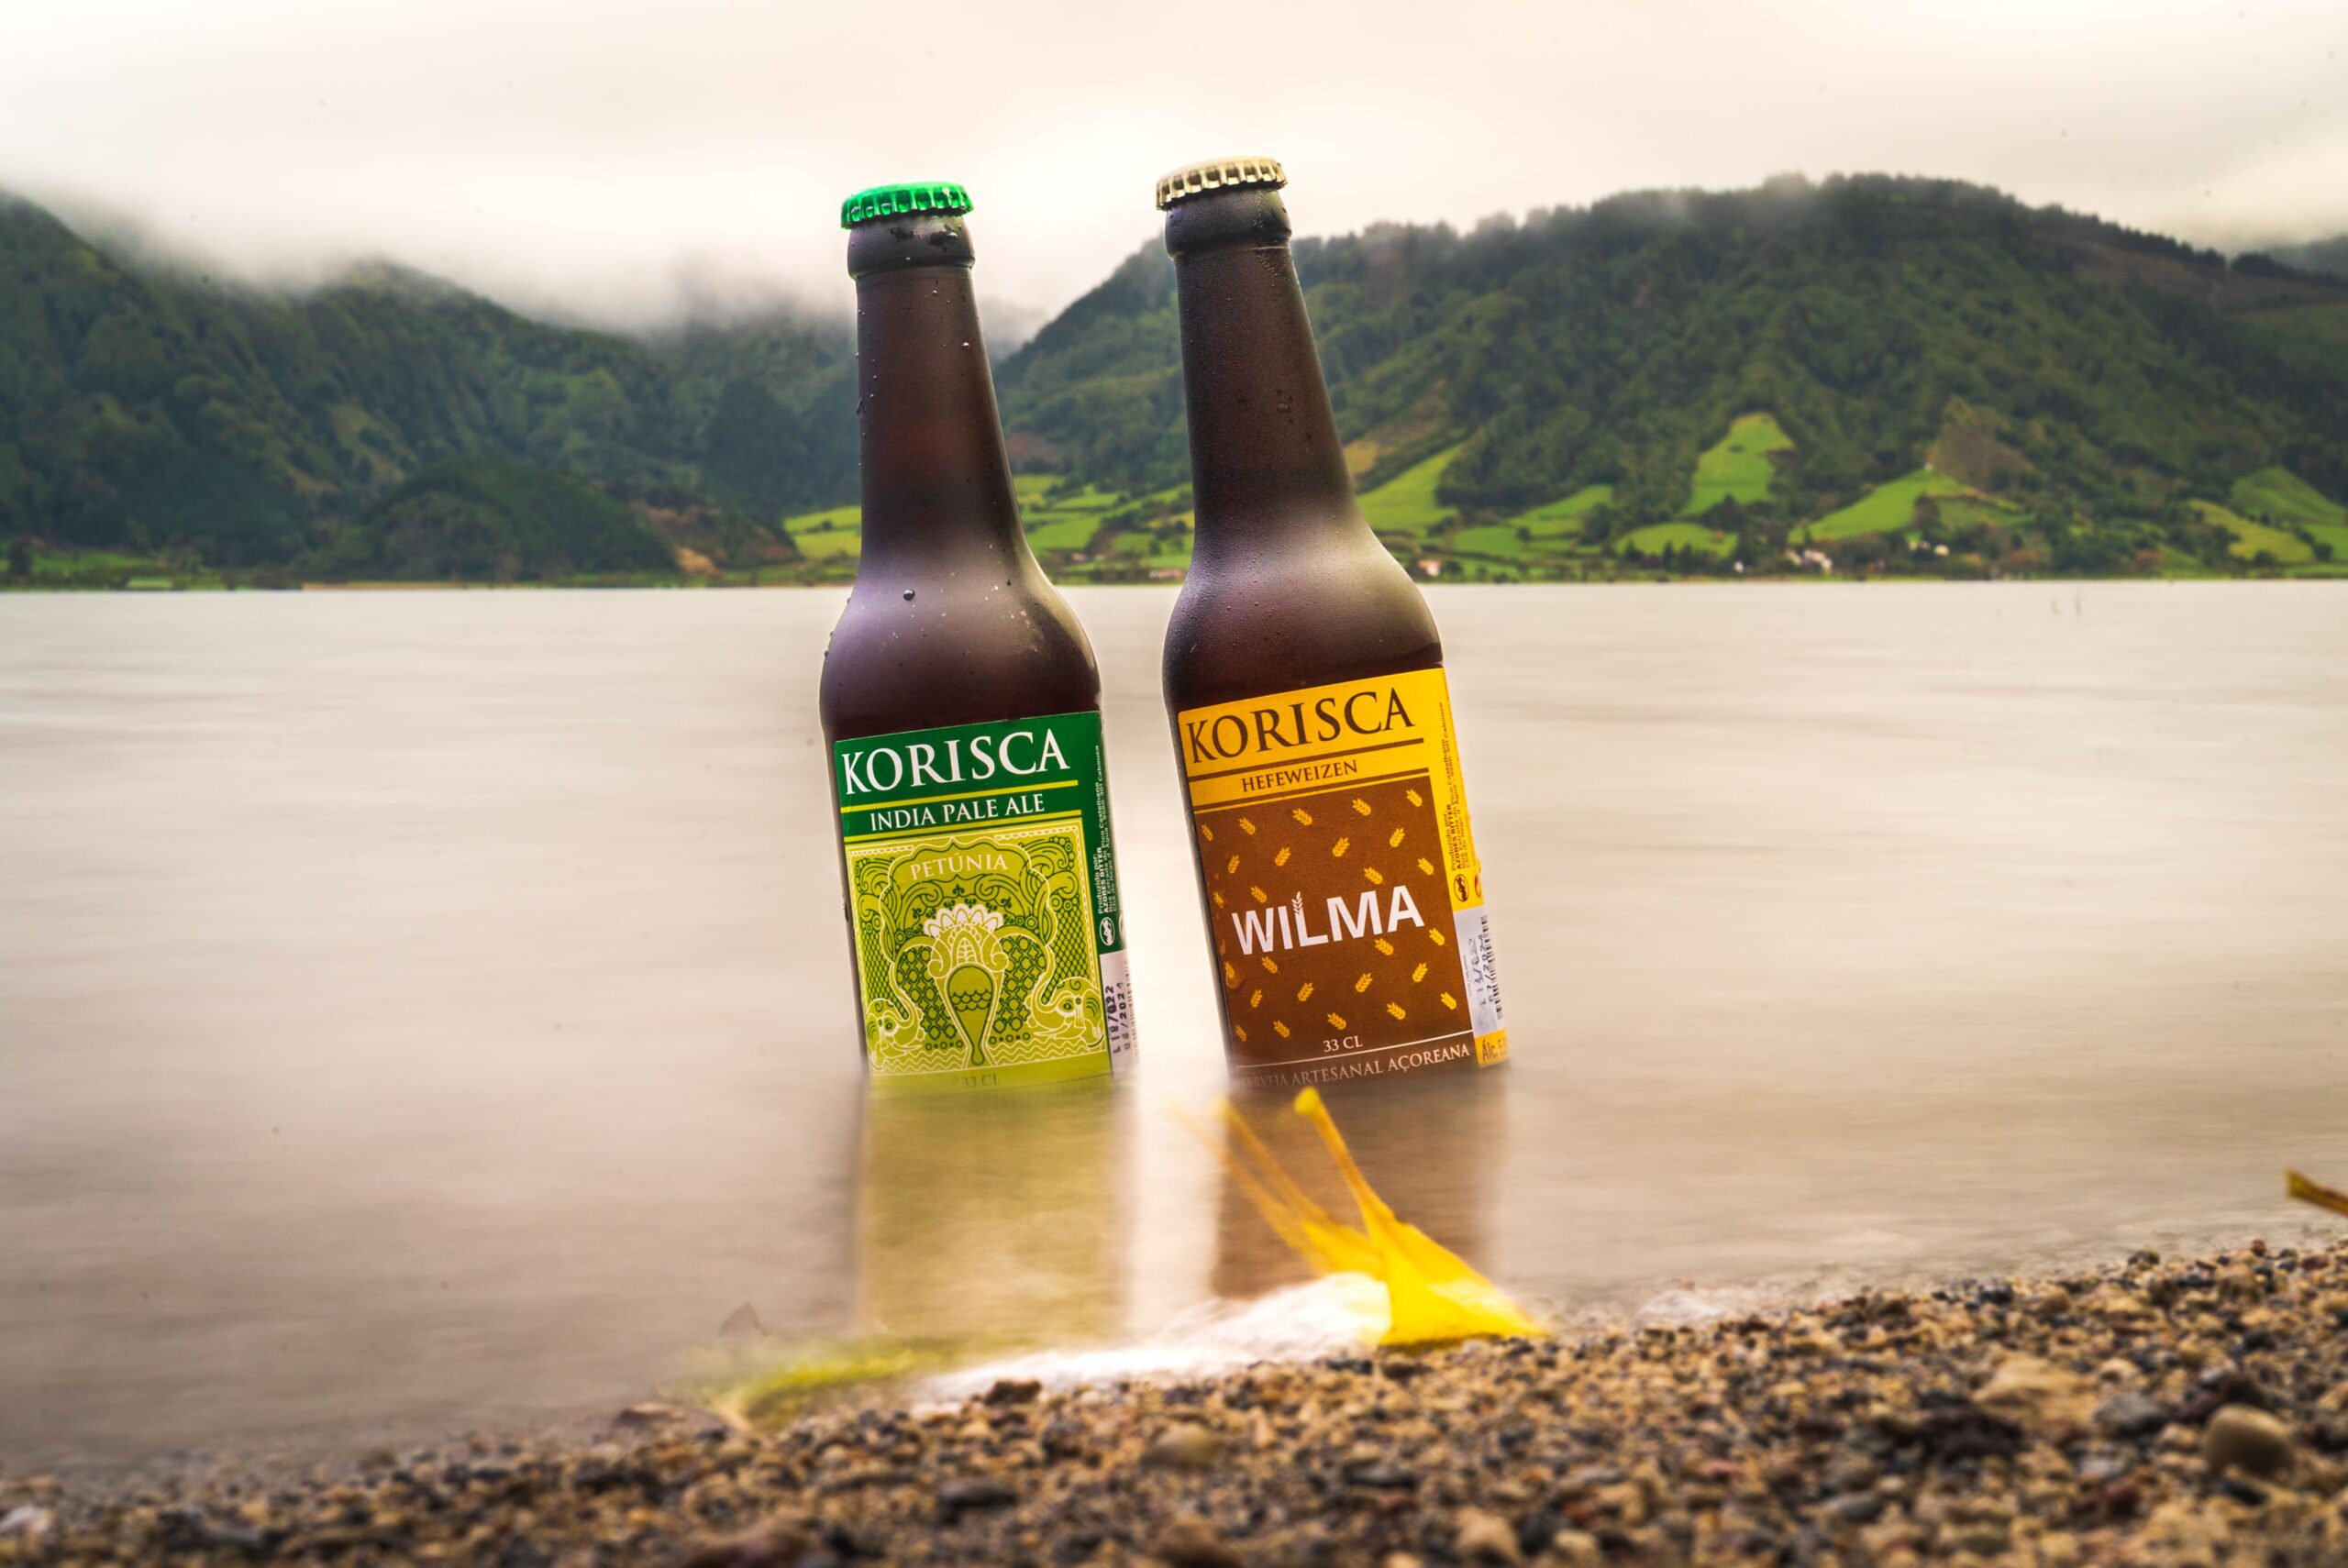 Korisca craft beer, Petunia (IPA) and Wilma (Hefeweizen), inside the Sete Cidades Lagoon, with the green valley in the backgroundSete Cidades, Ponta Delgada, São Miguel, Azores.